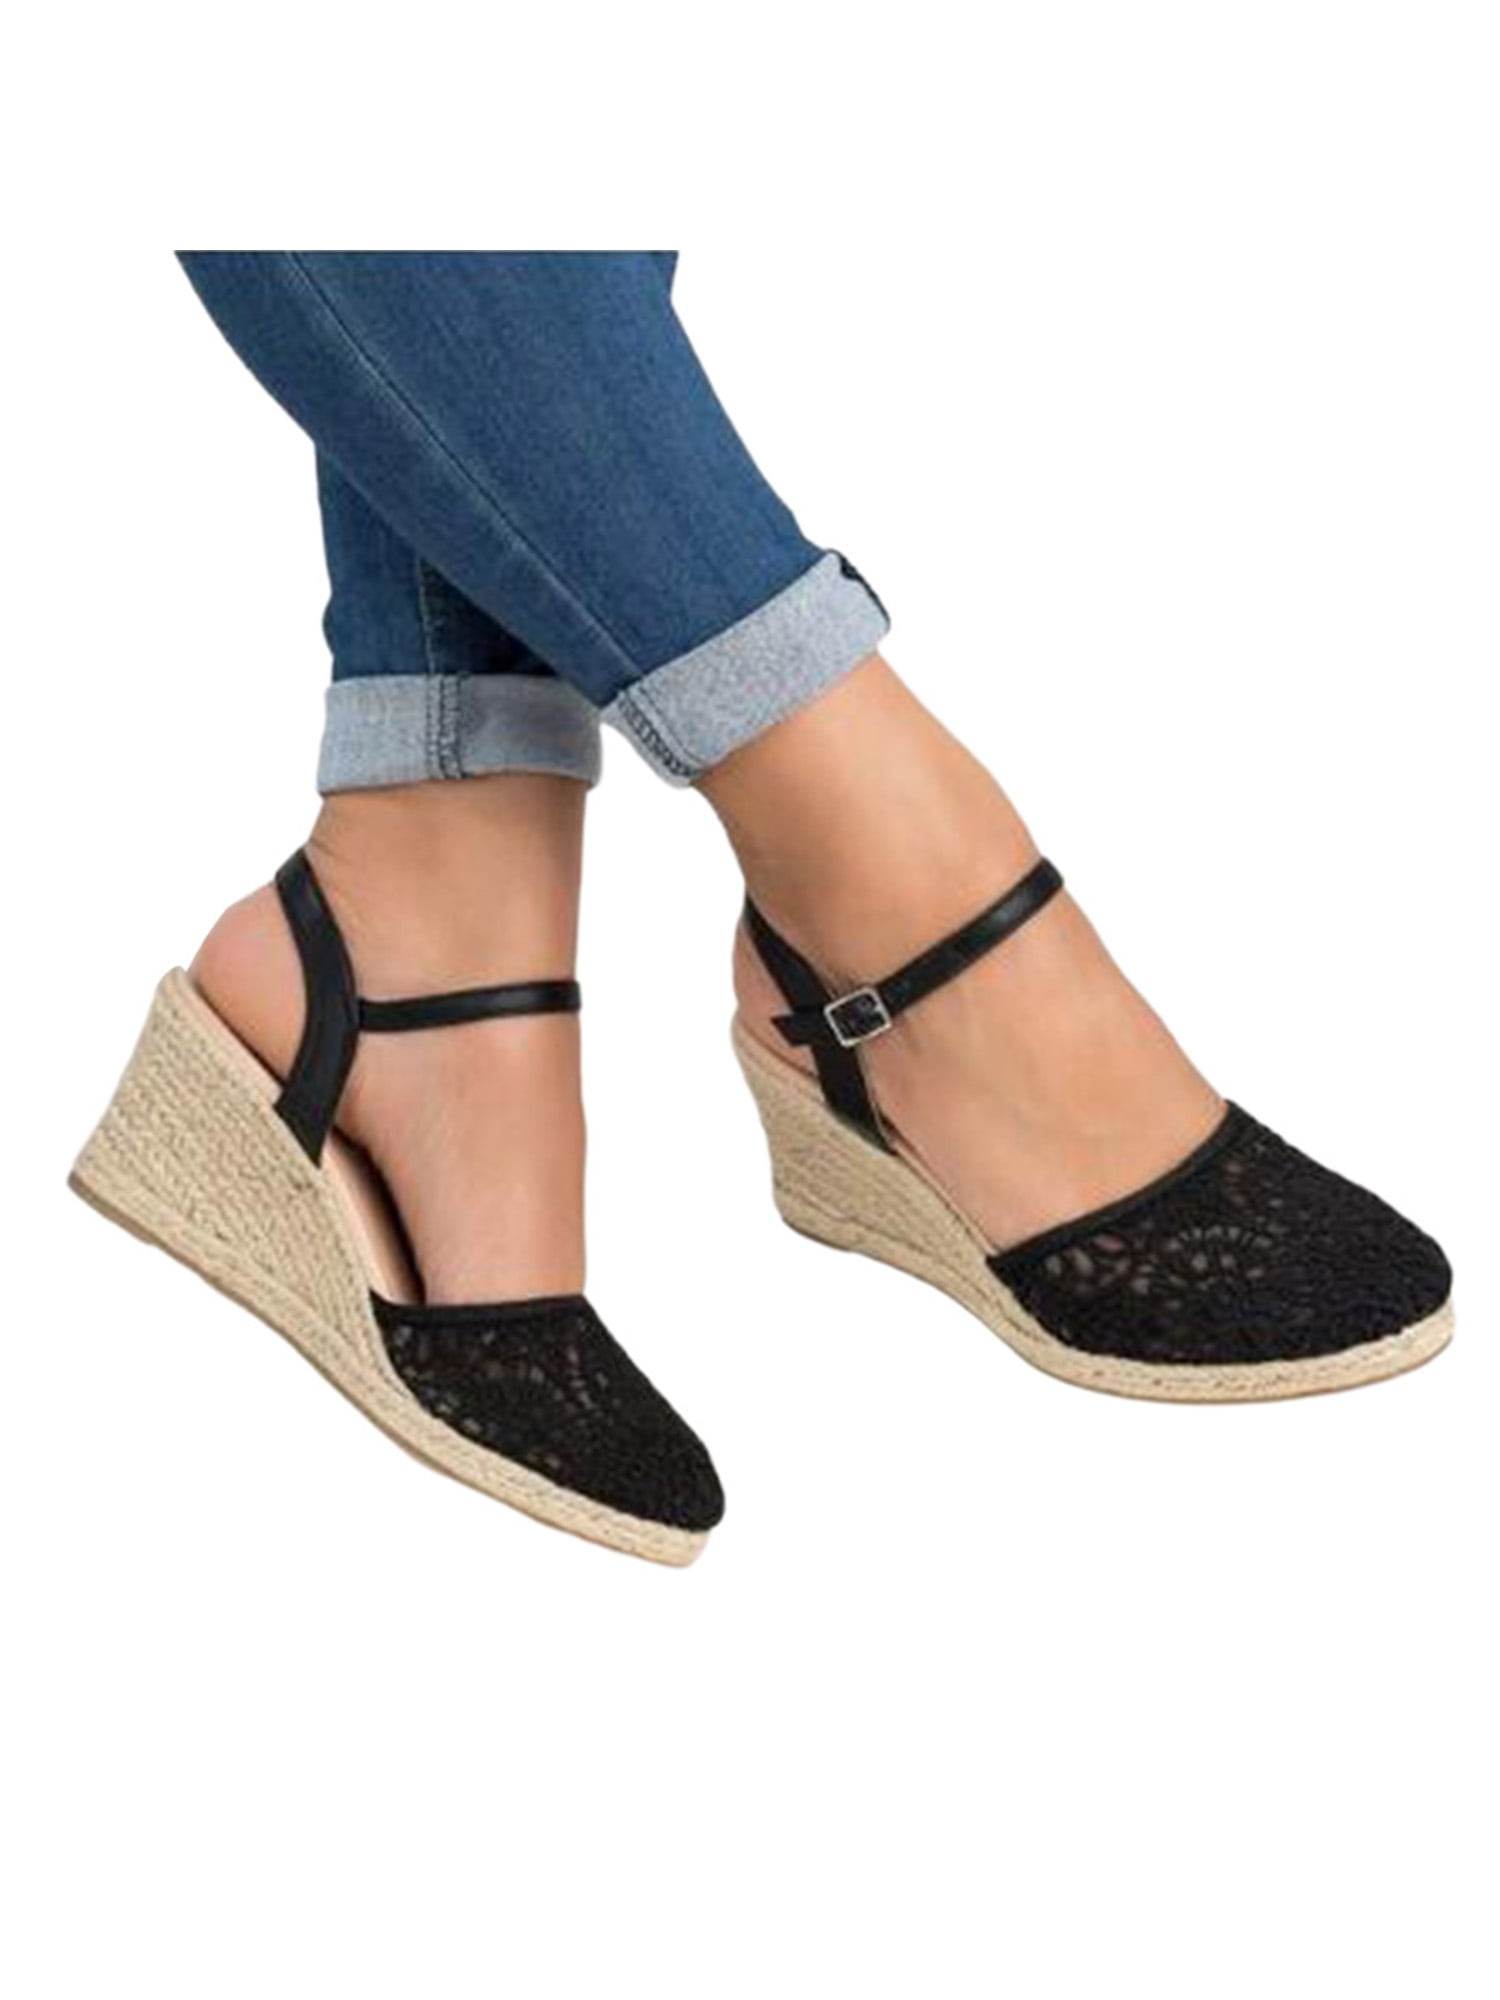 Details about   Women Casual Platform Wedge Espadrille Sandals Round Toe Ankle Strap Shoes Size 